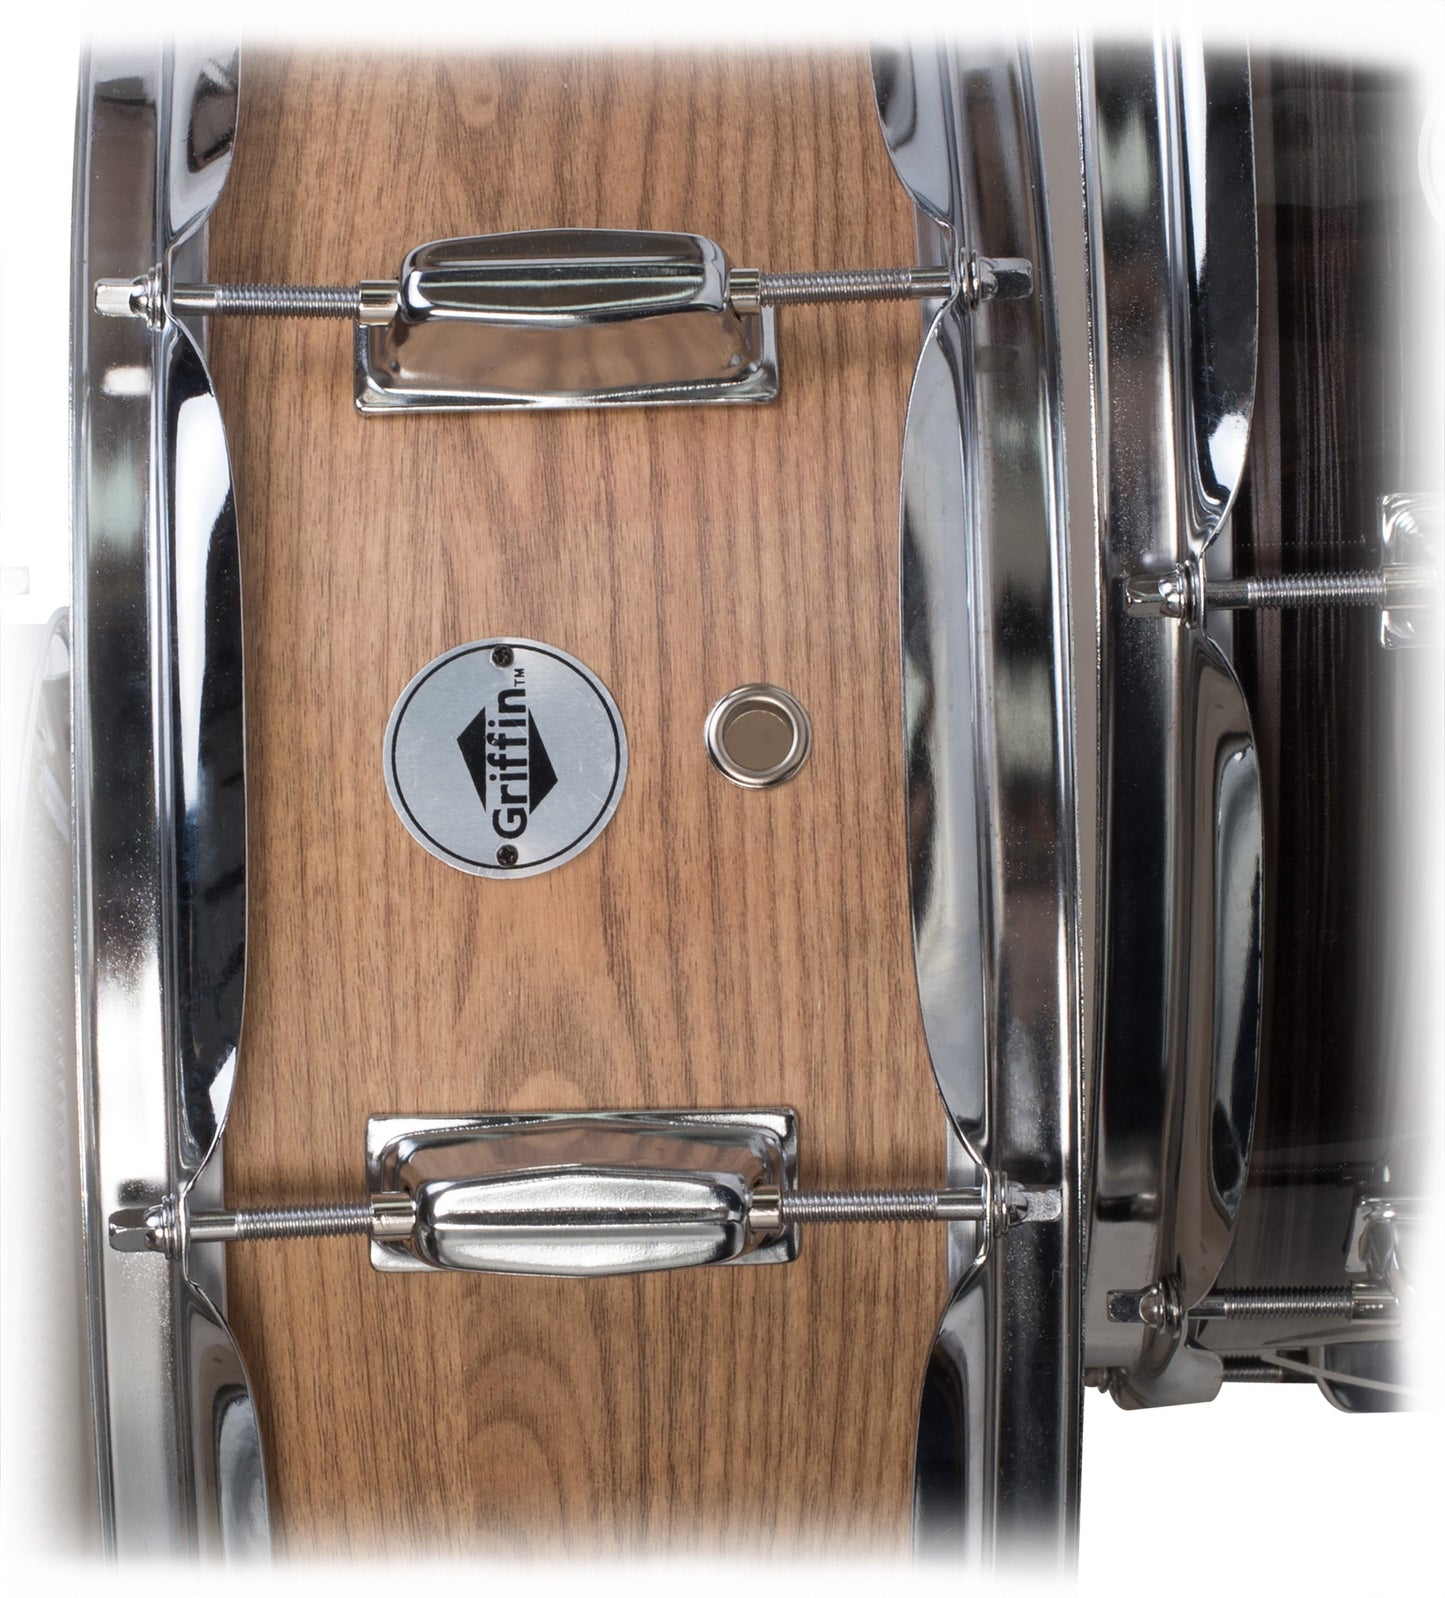 Oak Wood Snare Drum by GRIFFIN - PVC on Poplar Wood Shell 14" x 5.5" - Percussion Musical Instrument with Drummers Key for Students & Professionals